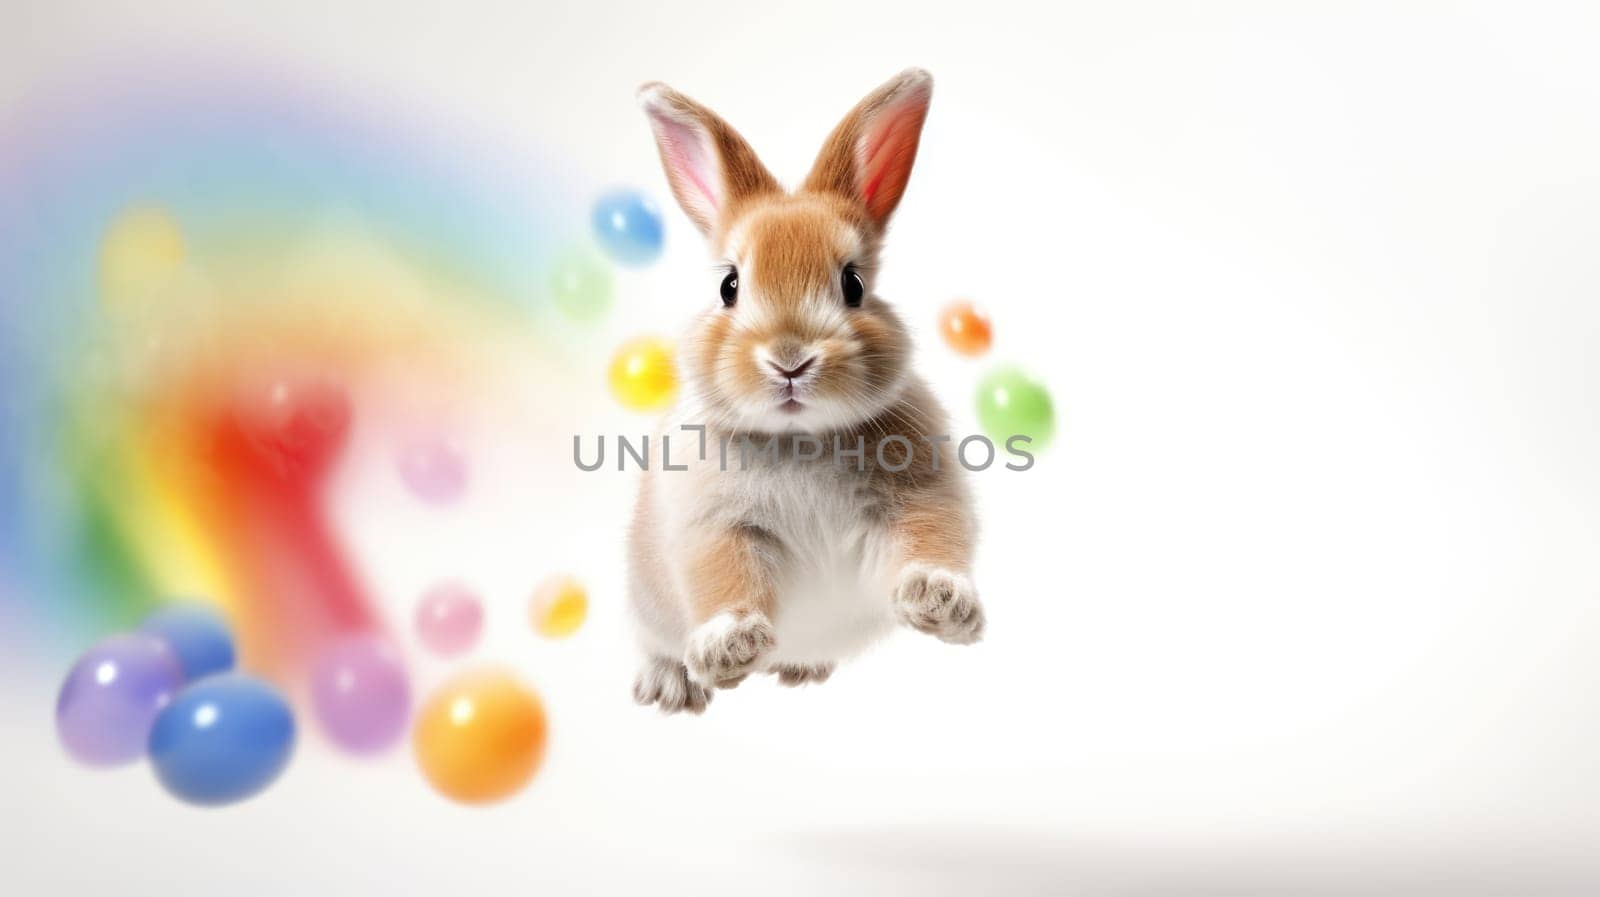 Adorable bunny happily hopping on white background vibrant rainbow and colorful Easter eggs flying around by JuliaDorian